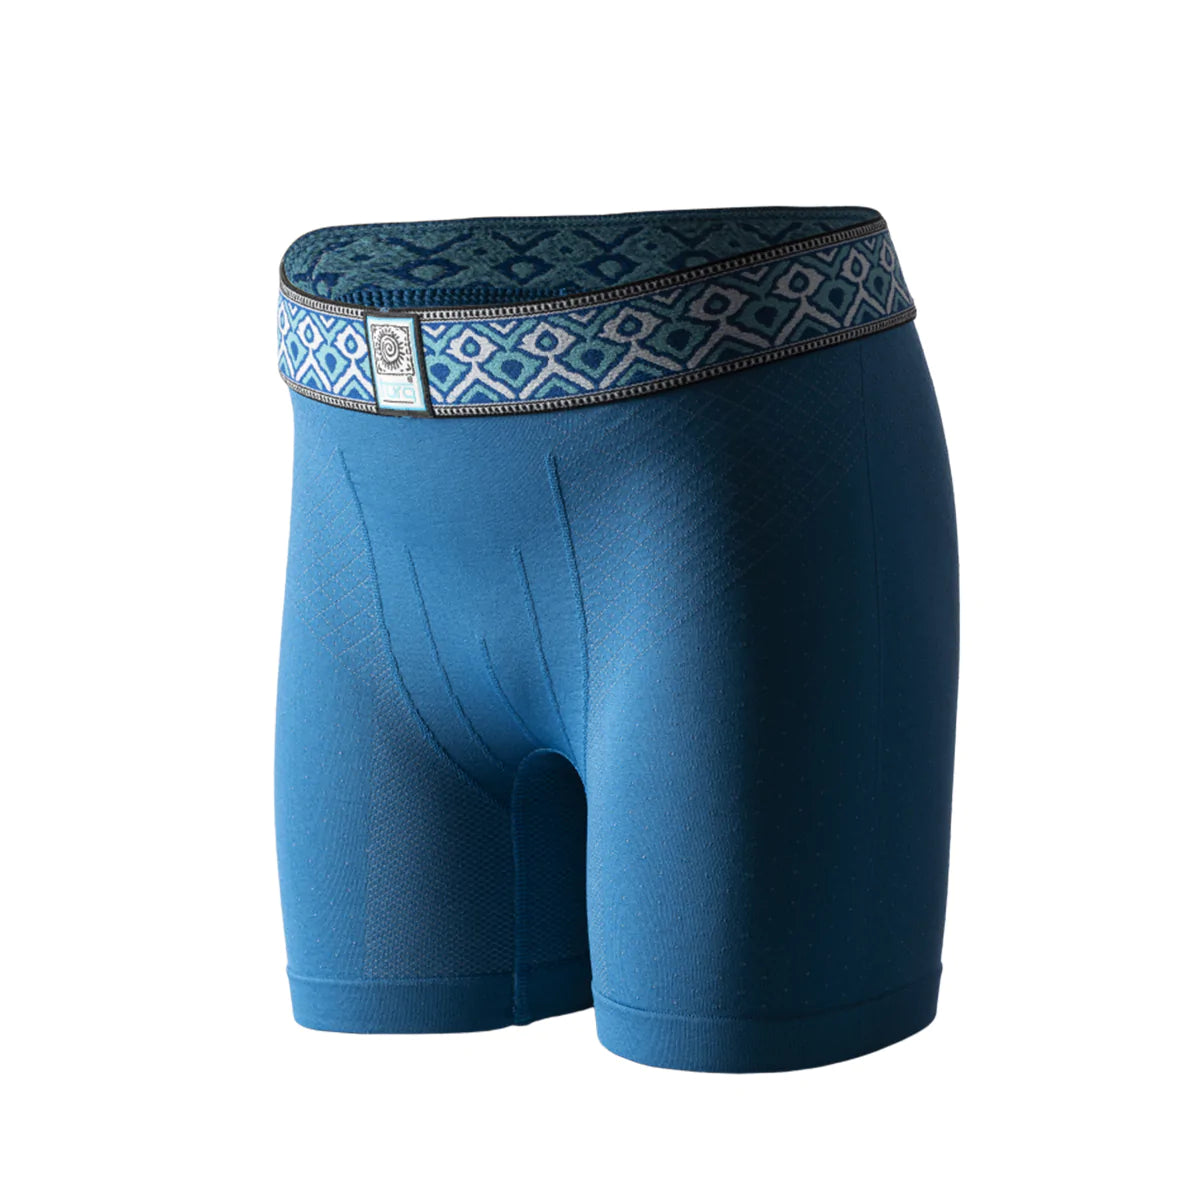 TURQ boxer briefs in teal blue with a teal, blue and white embroidered waistband